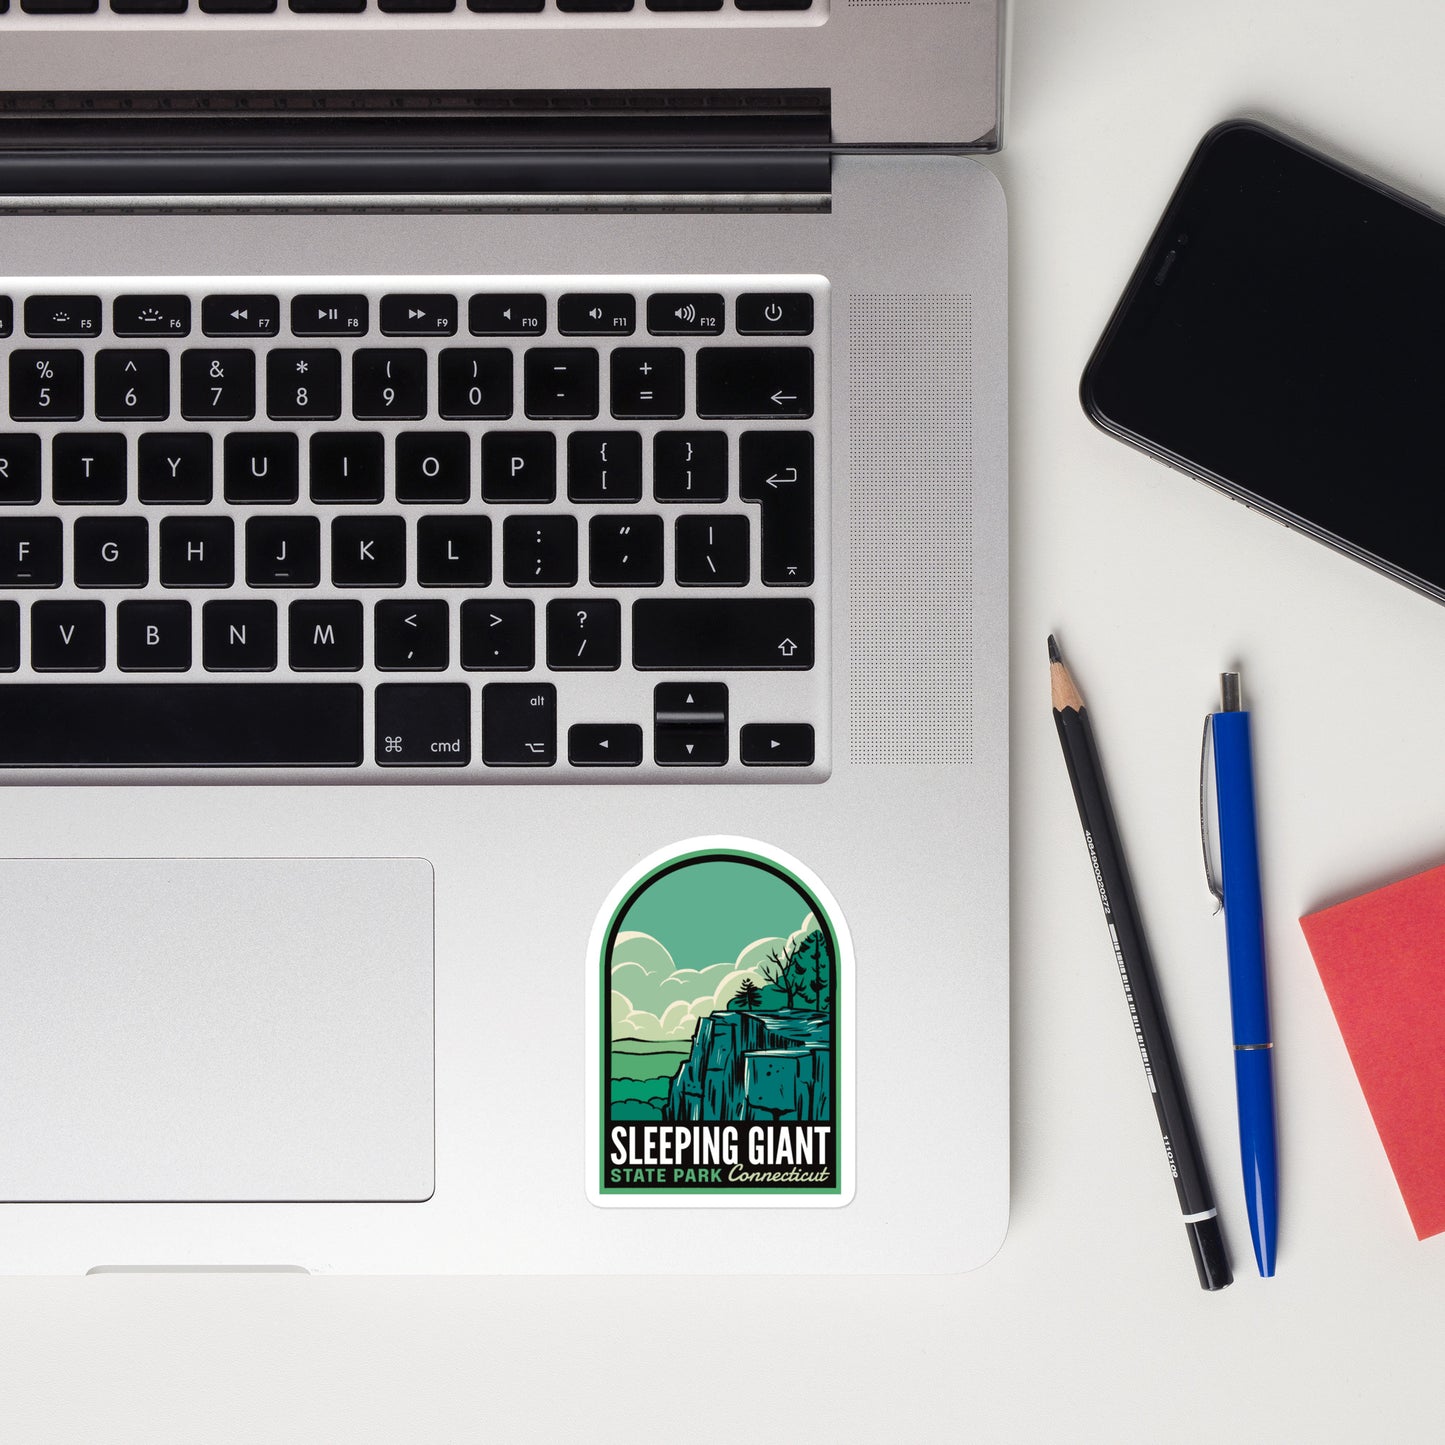 A sticker of Sleeping Giant State Park on a laptop